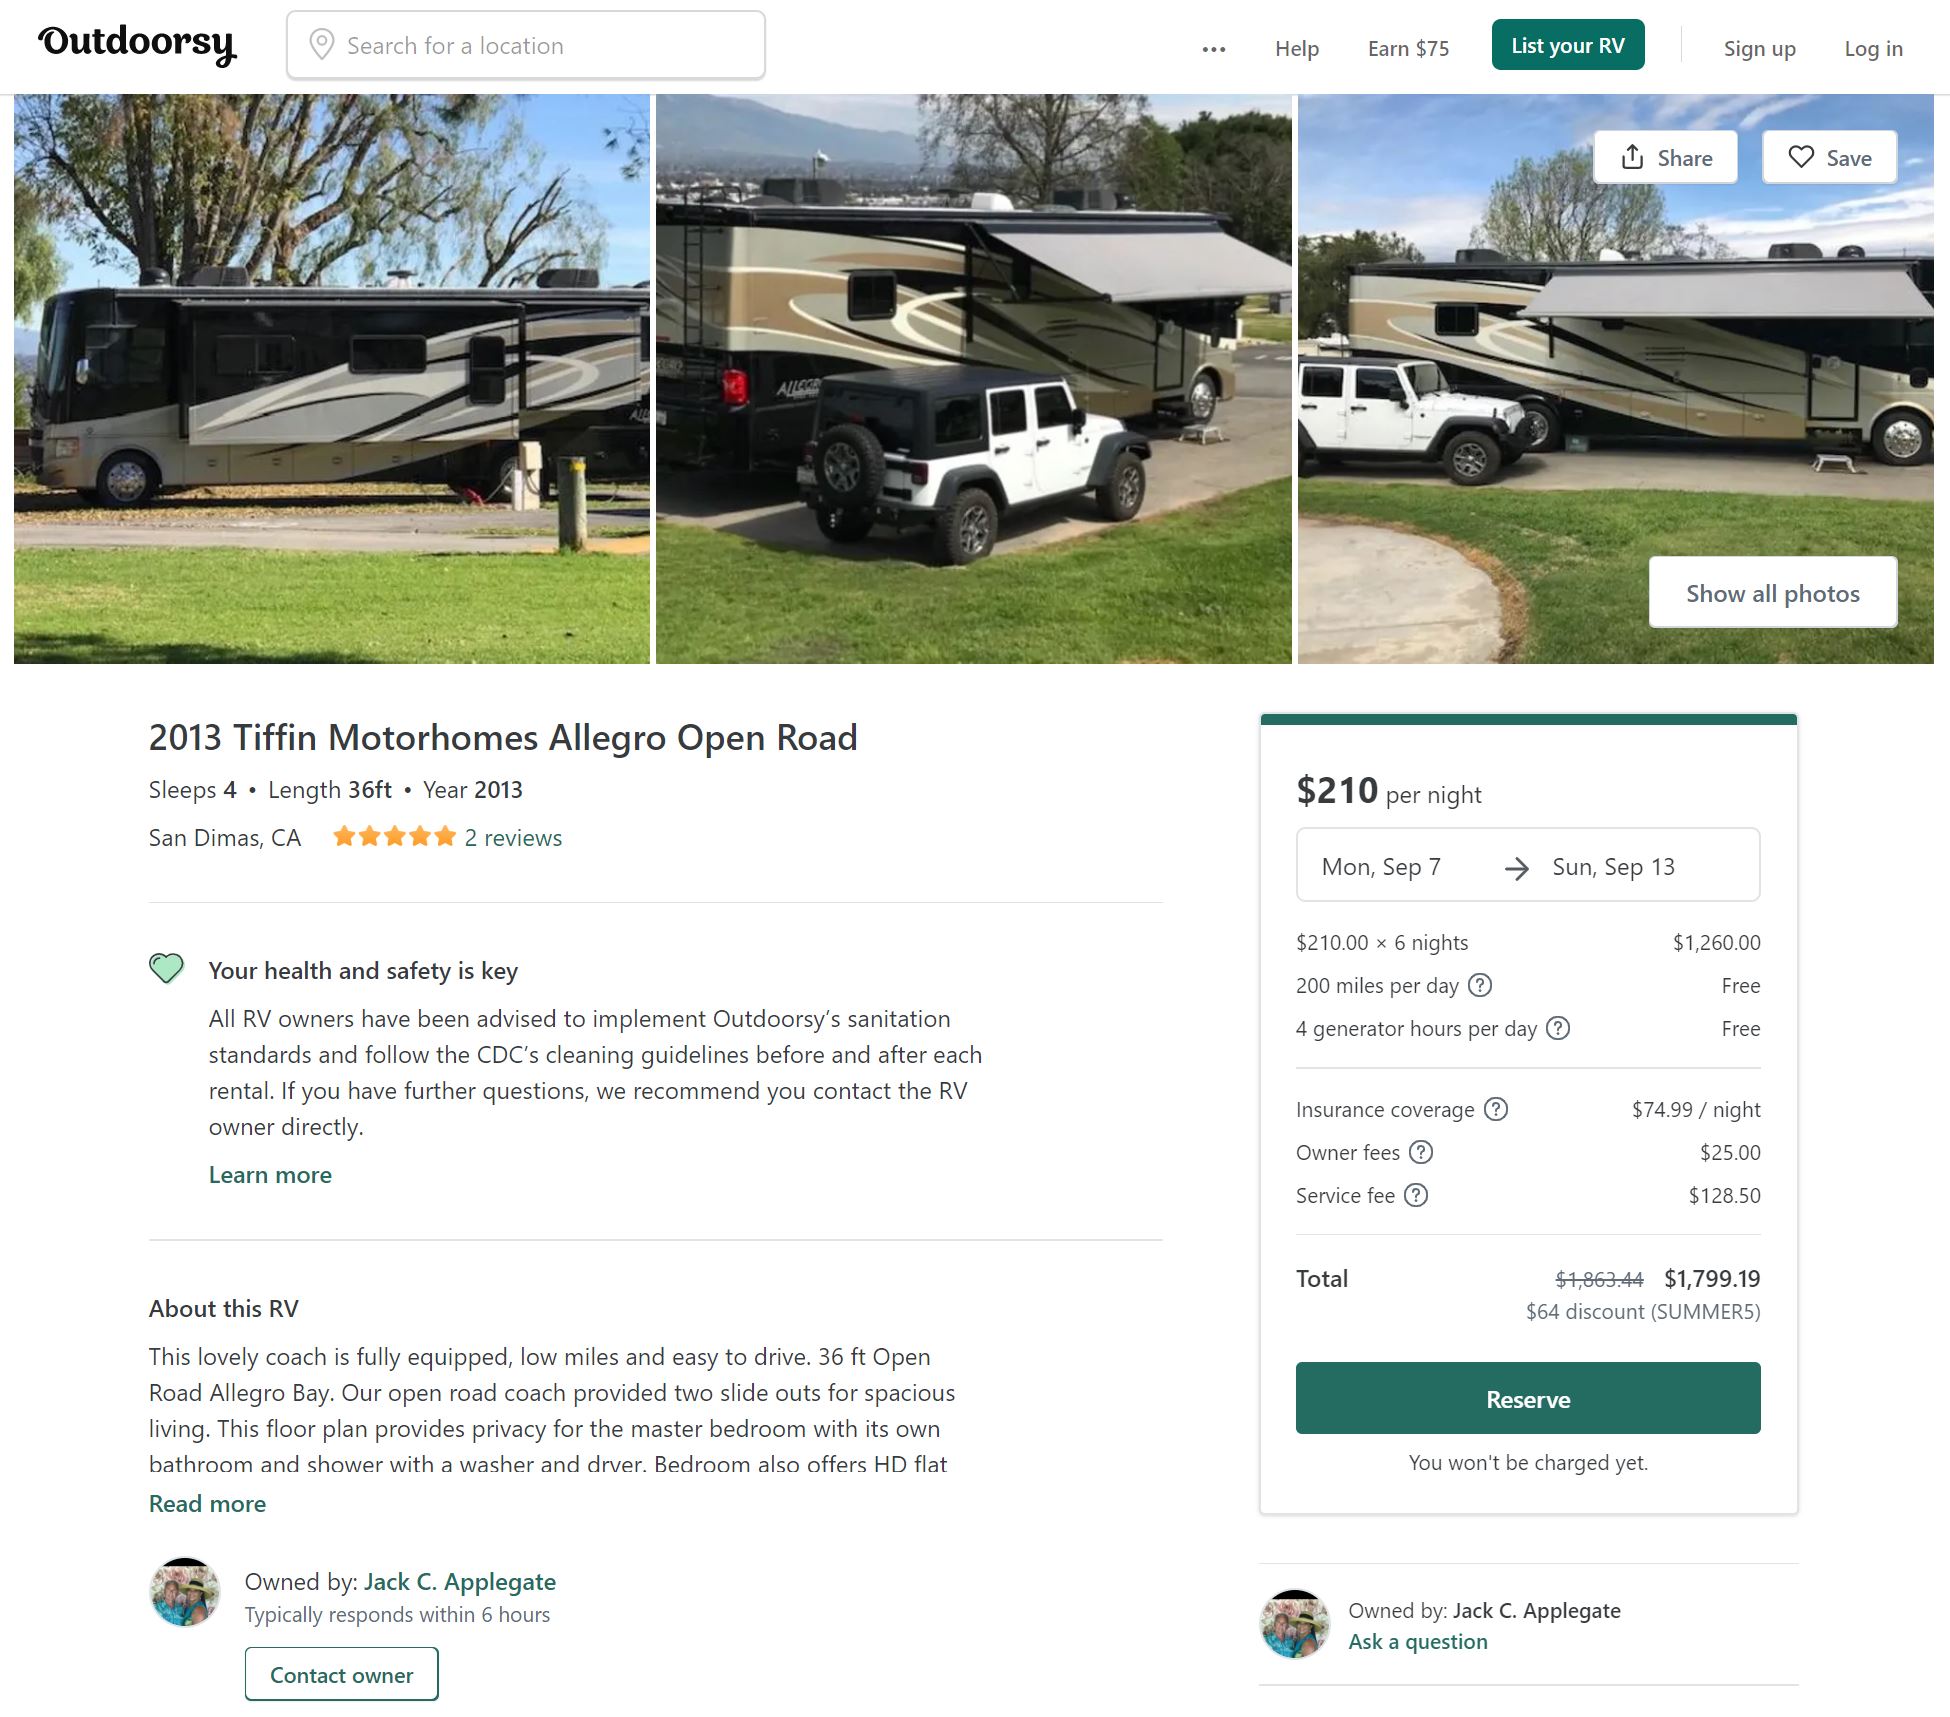 Outdoorsy RV Rental Marketplace - The Ultimate Guide [2020]